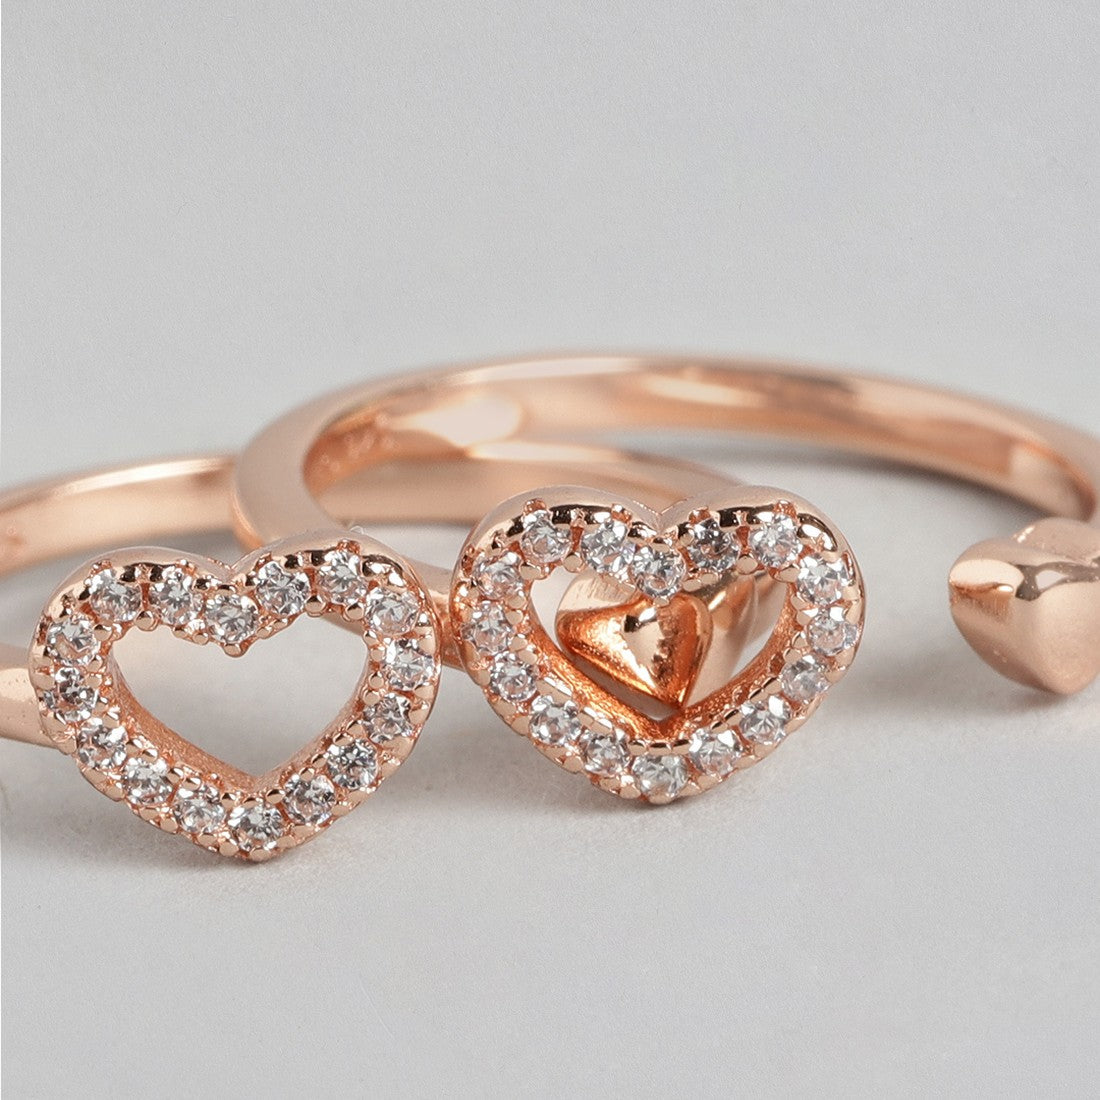 Dreamy Hearts Rose Gold 925 Silver Toe Ring